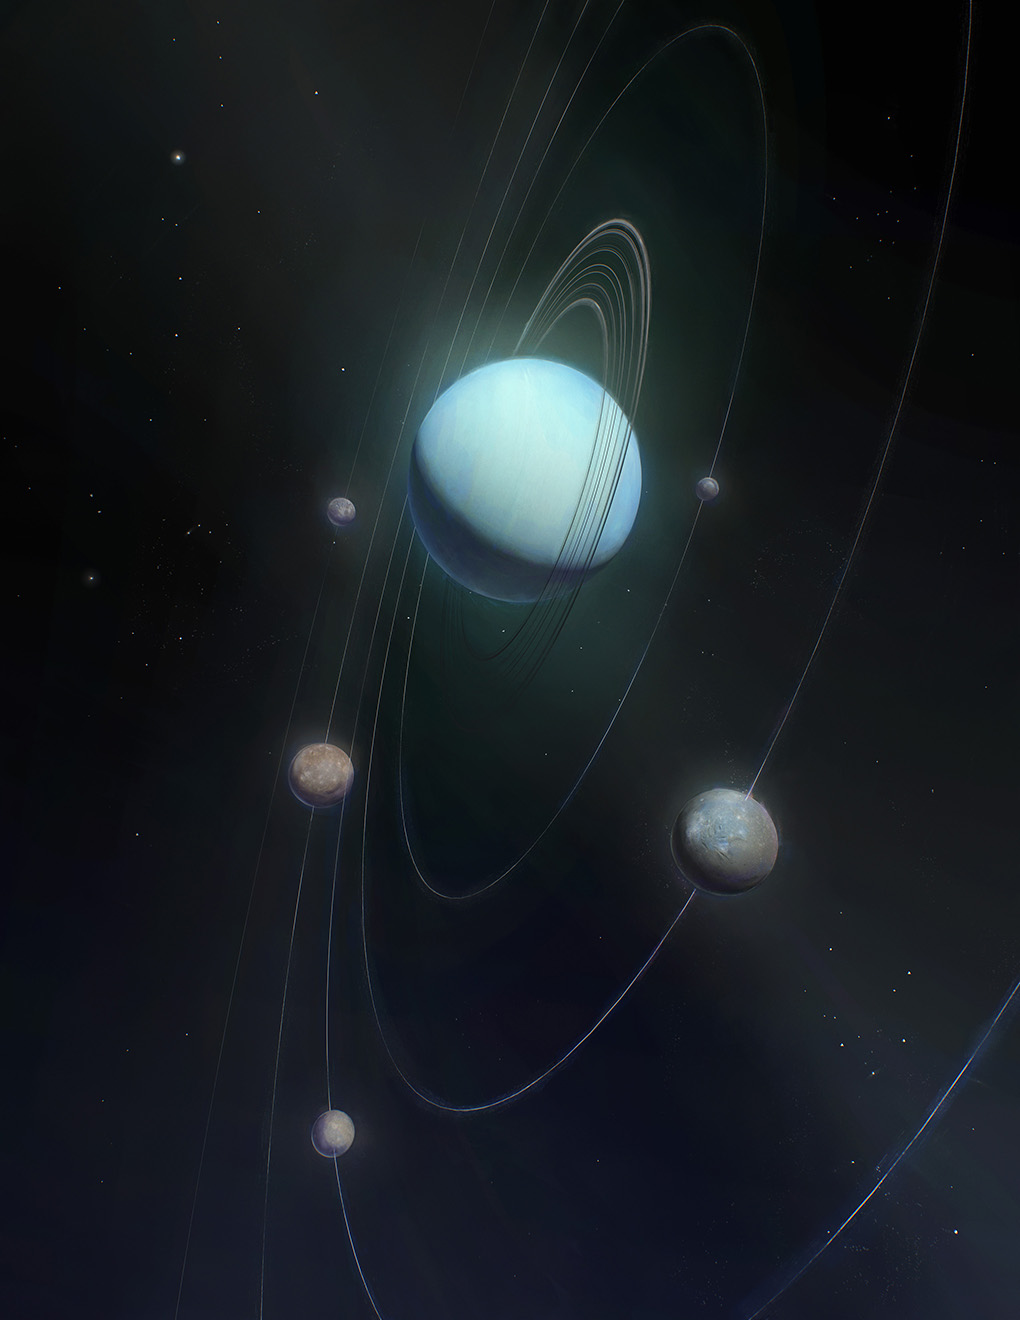 Illustration with Uranus as a turquoise sphere and rings tilted slightly off vertical. Around Uranus are five rocky moons moving along their nearly vertical orbits, which are marked by light gray lines